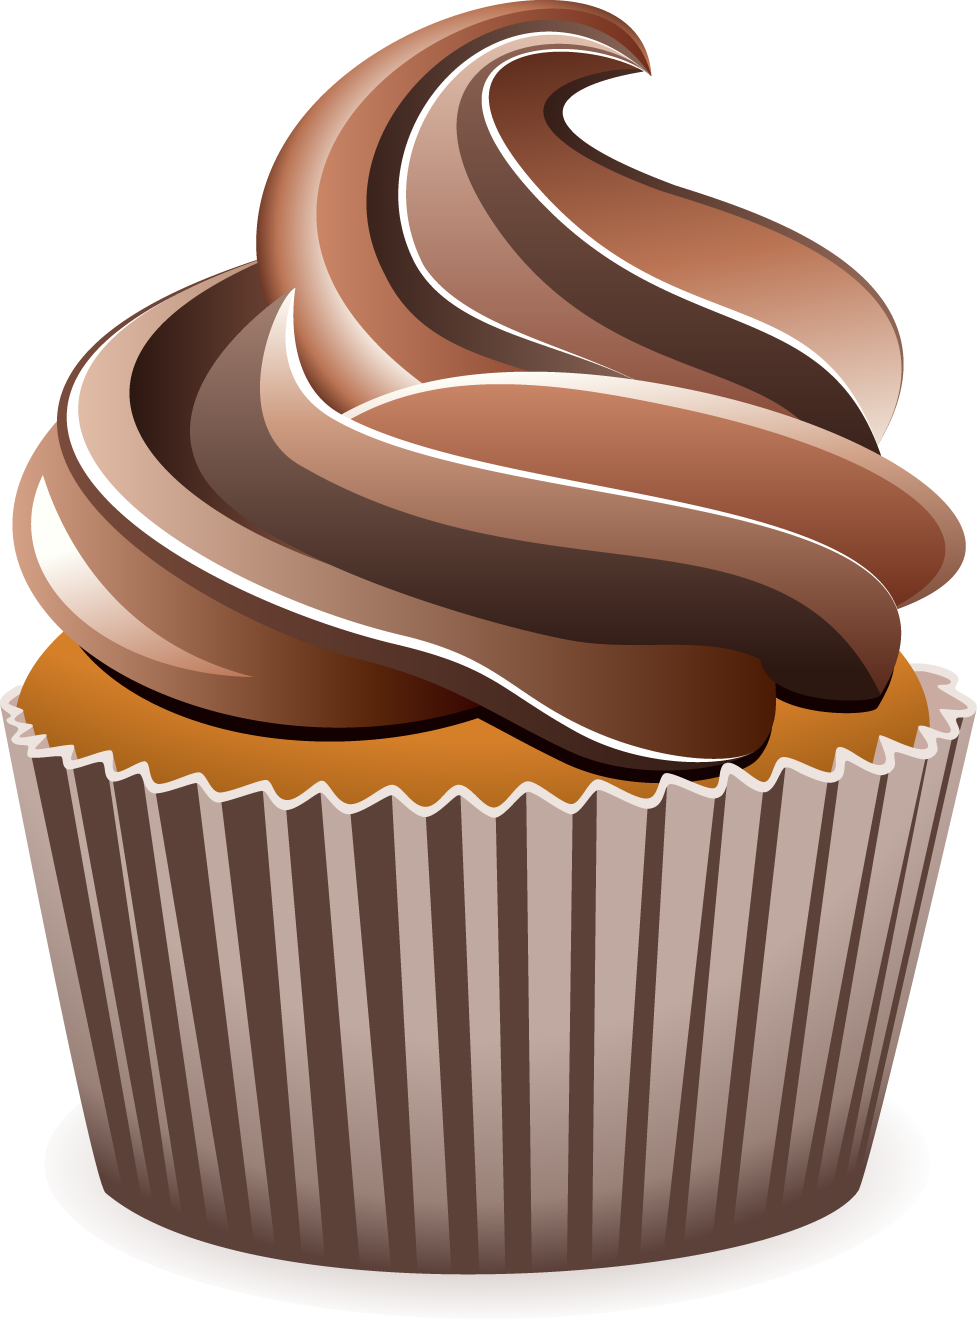 Free Free Cupcake Clipart, Download Free Clip Art, Free Clip Art on